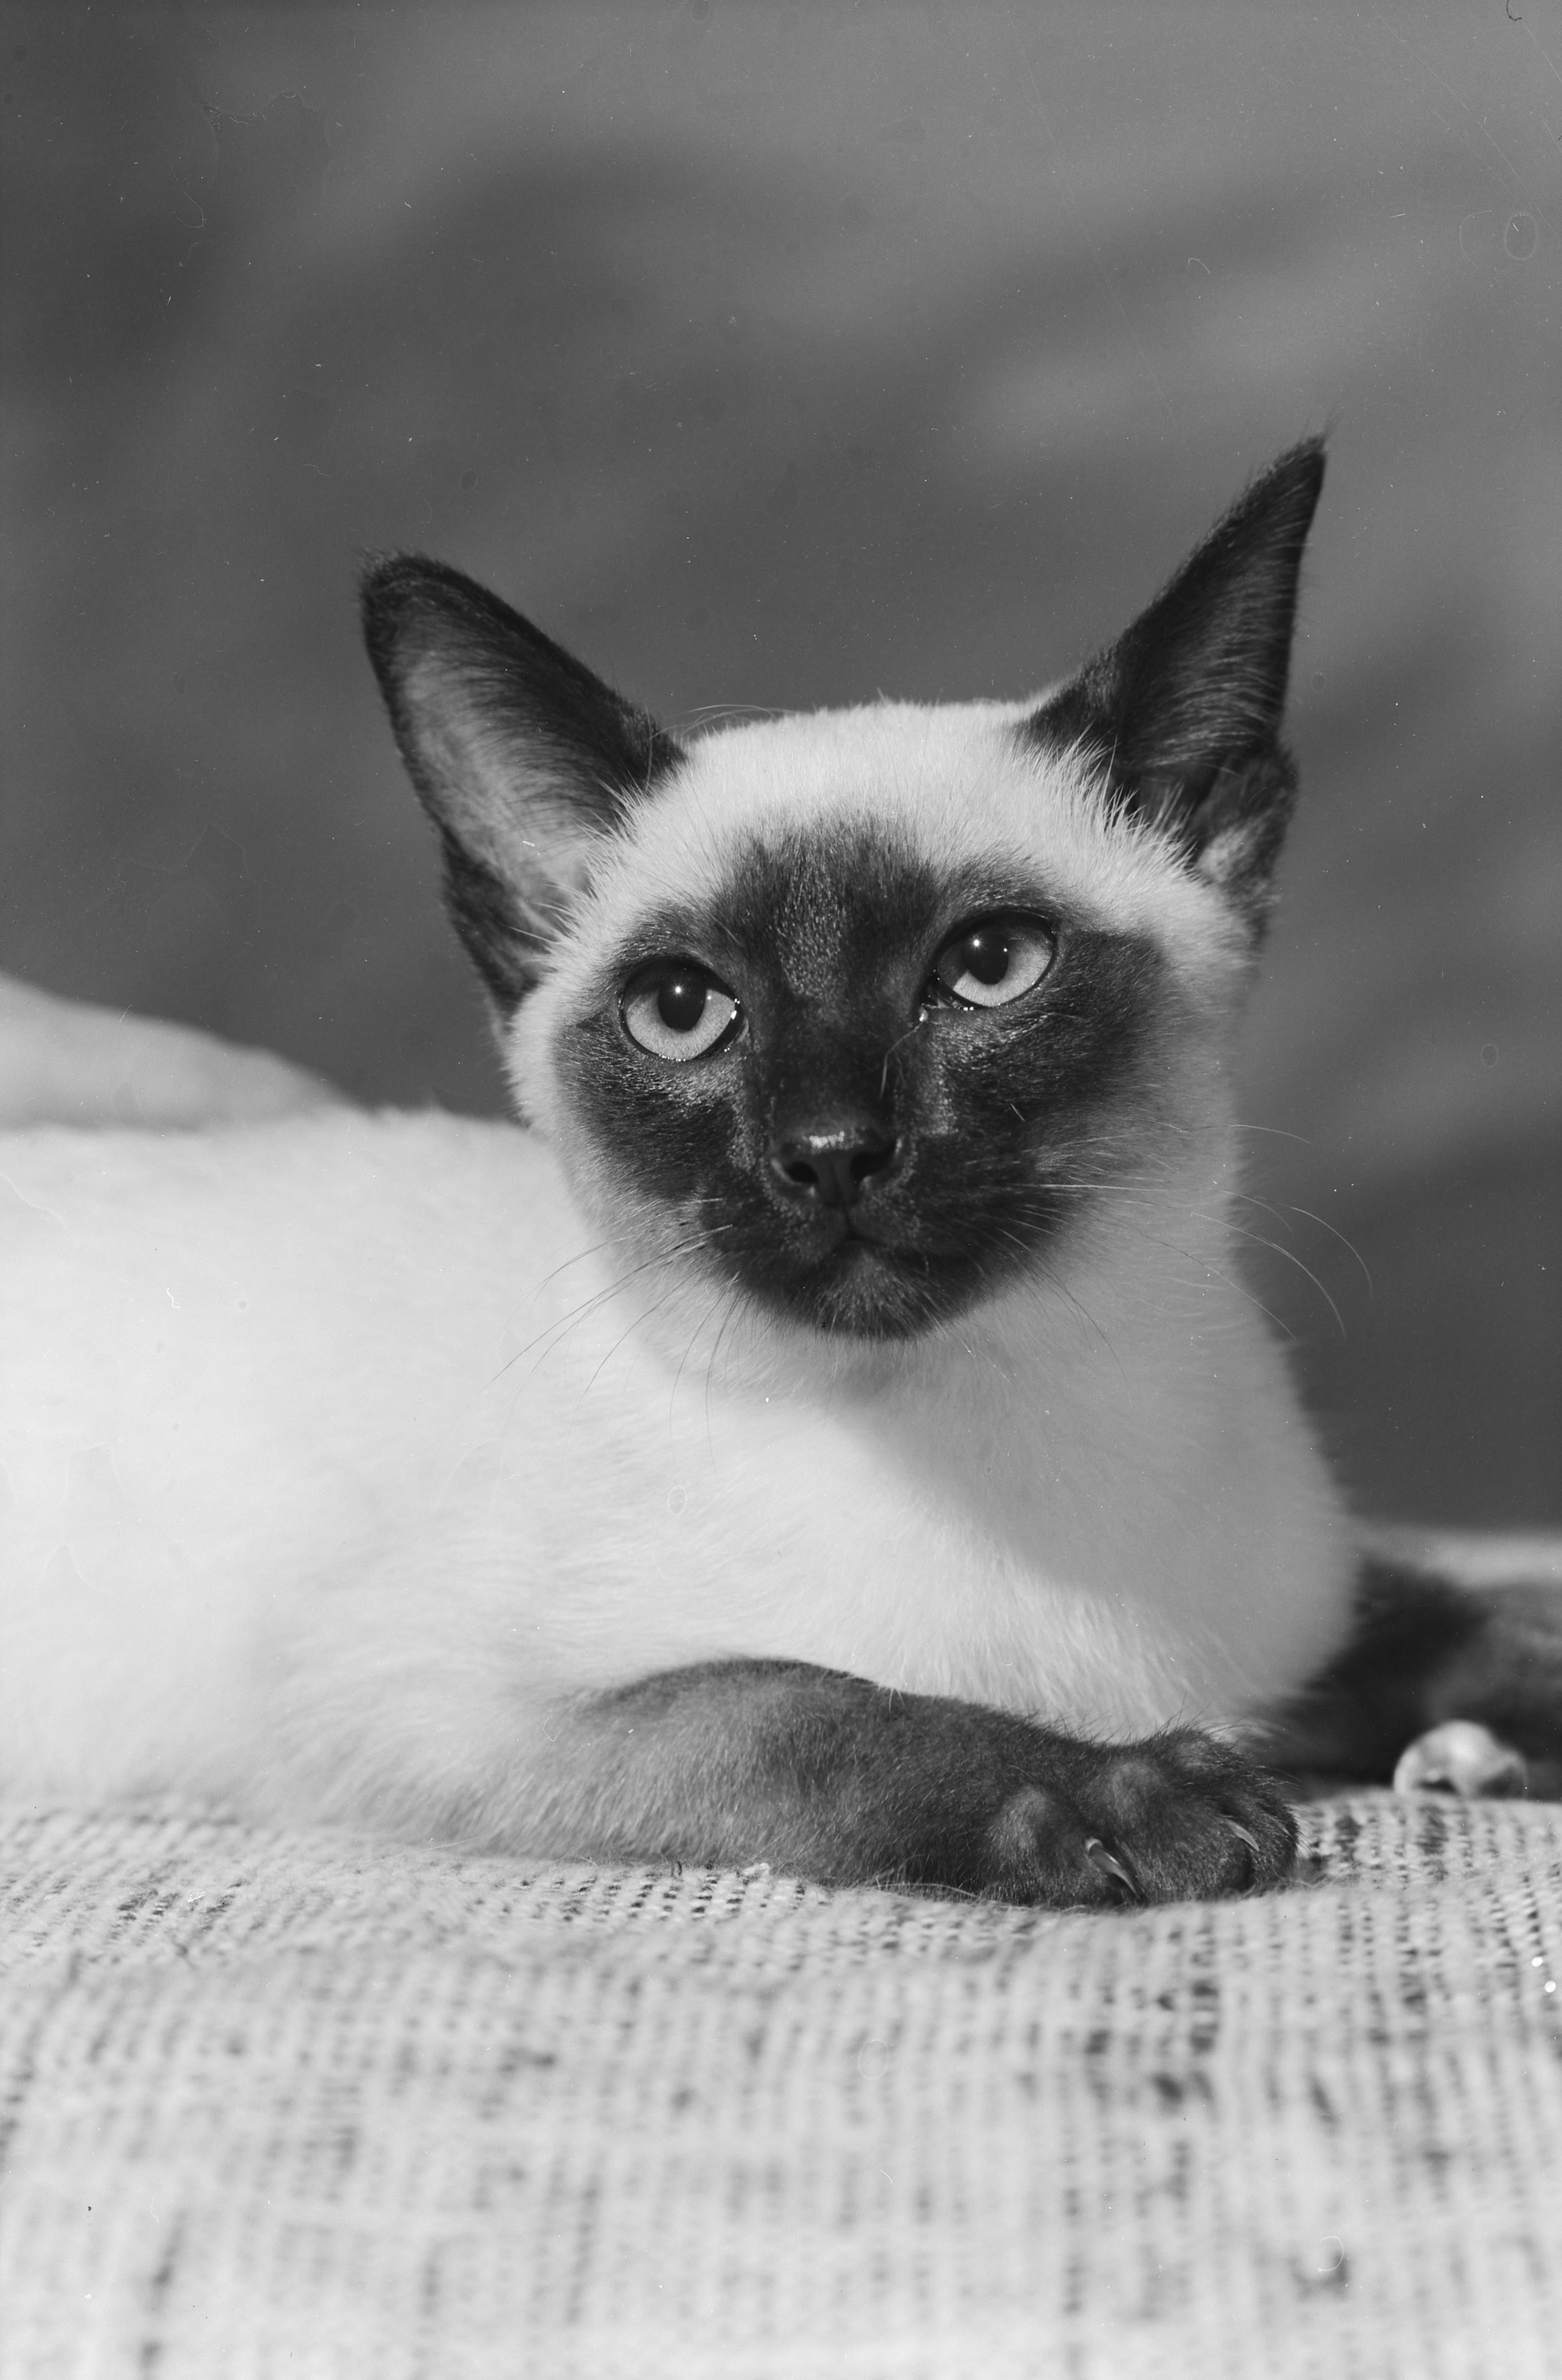 A black and white close up of the head and front paws of a siamese cat with dark ears, face, and paws, facing right.